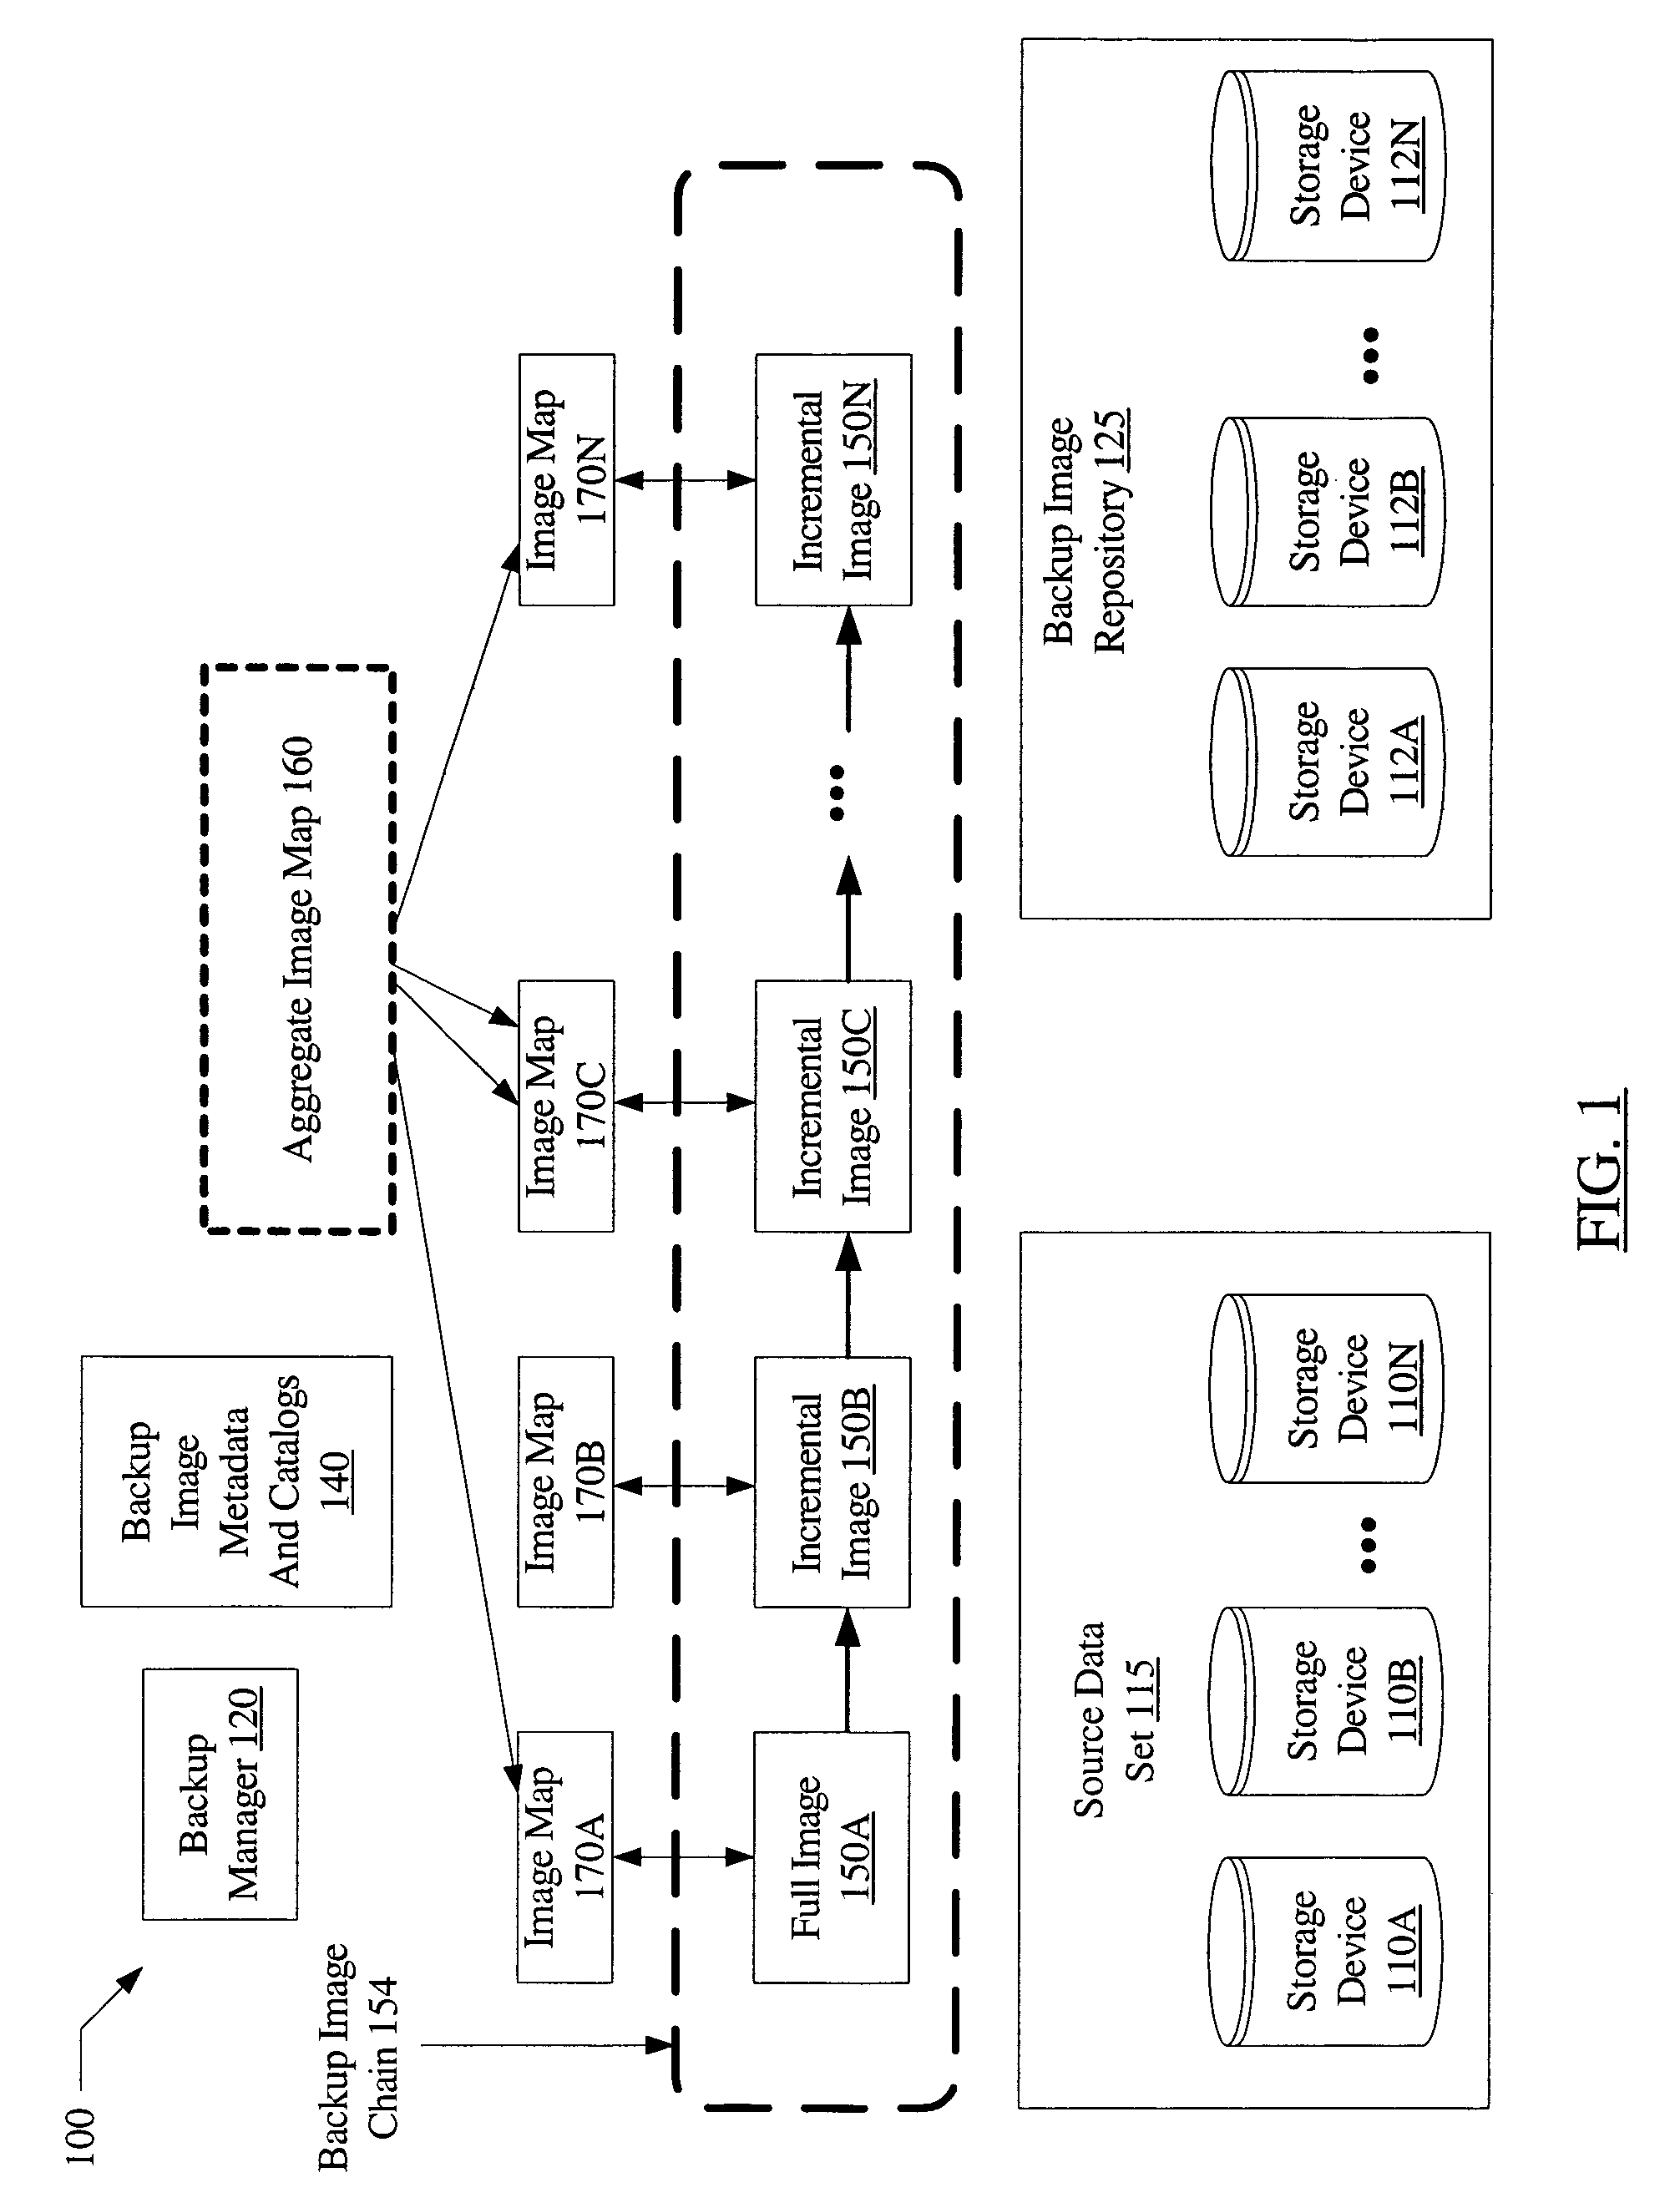 System and method for efficient creation of aggregate backup images